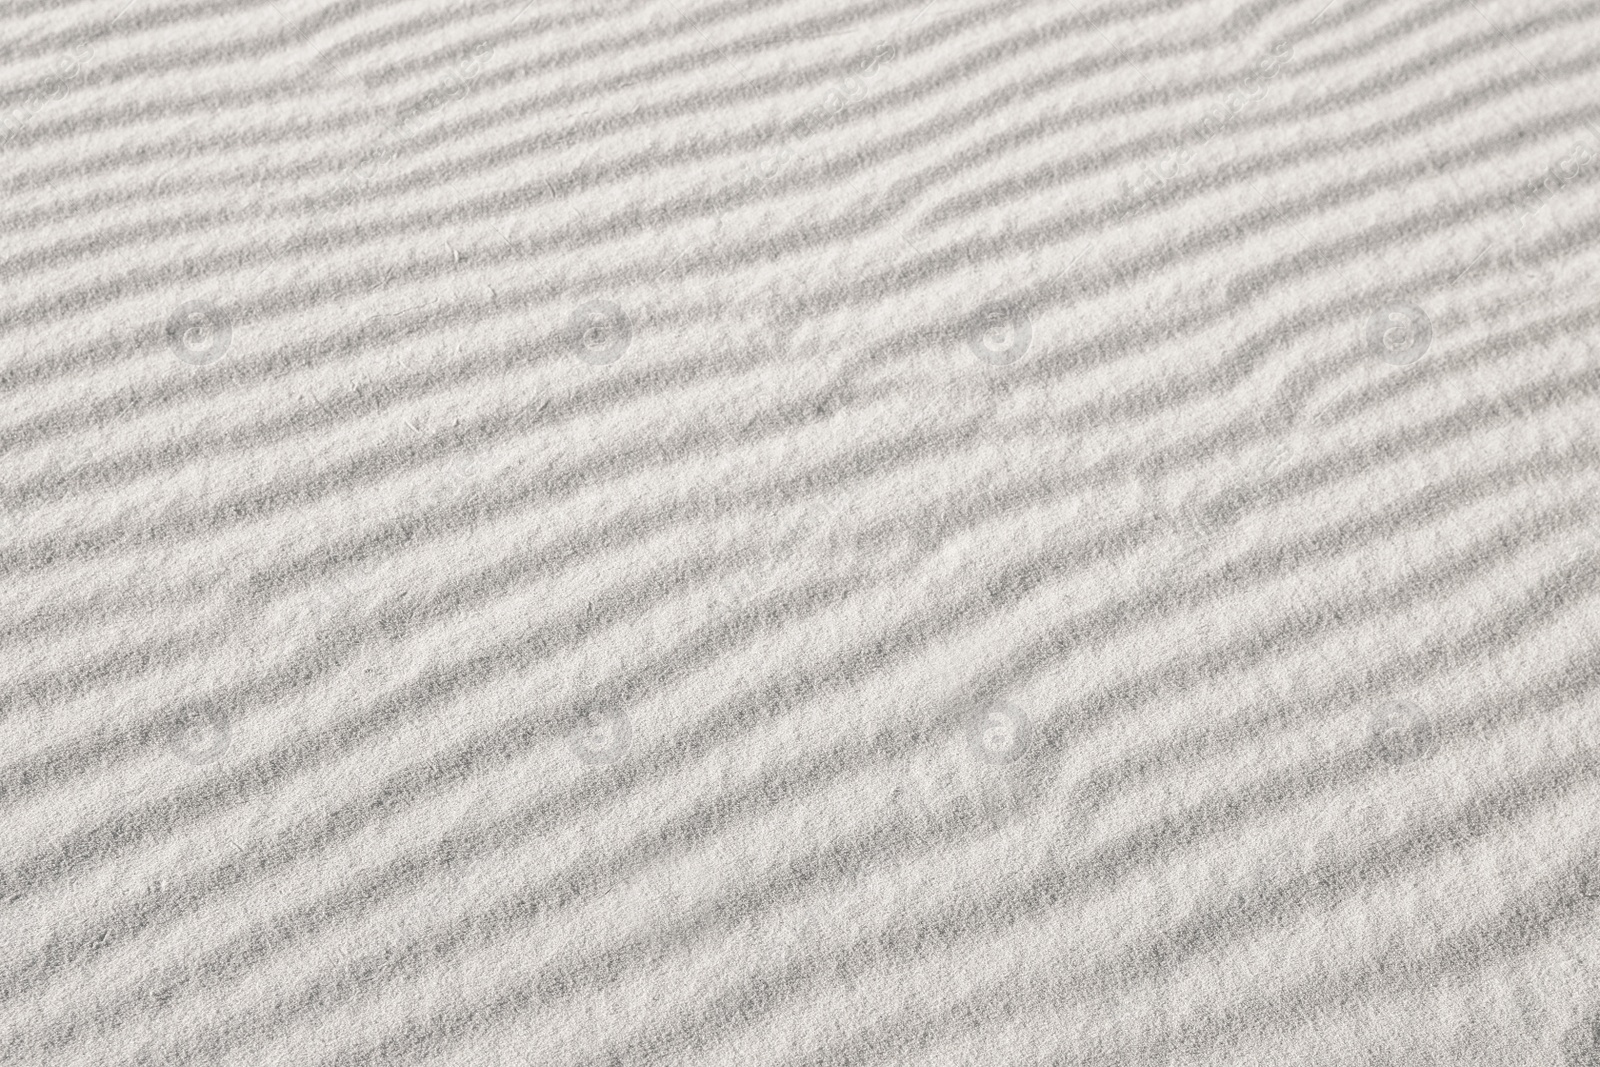 Image of Dry beach sand as background, closeup view